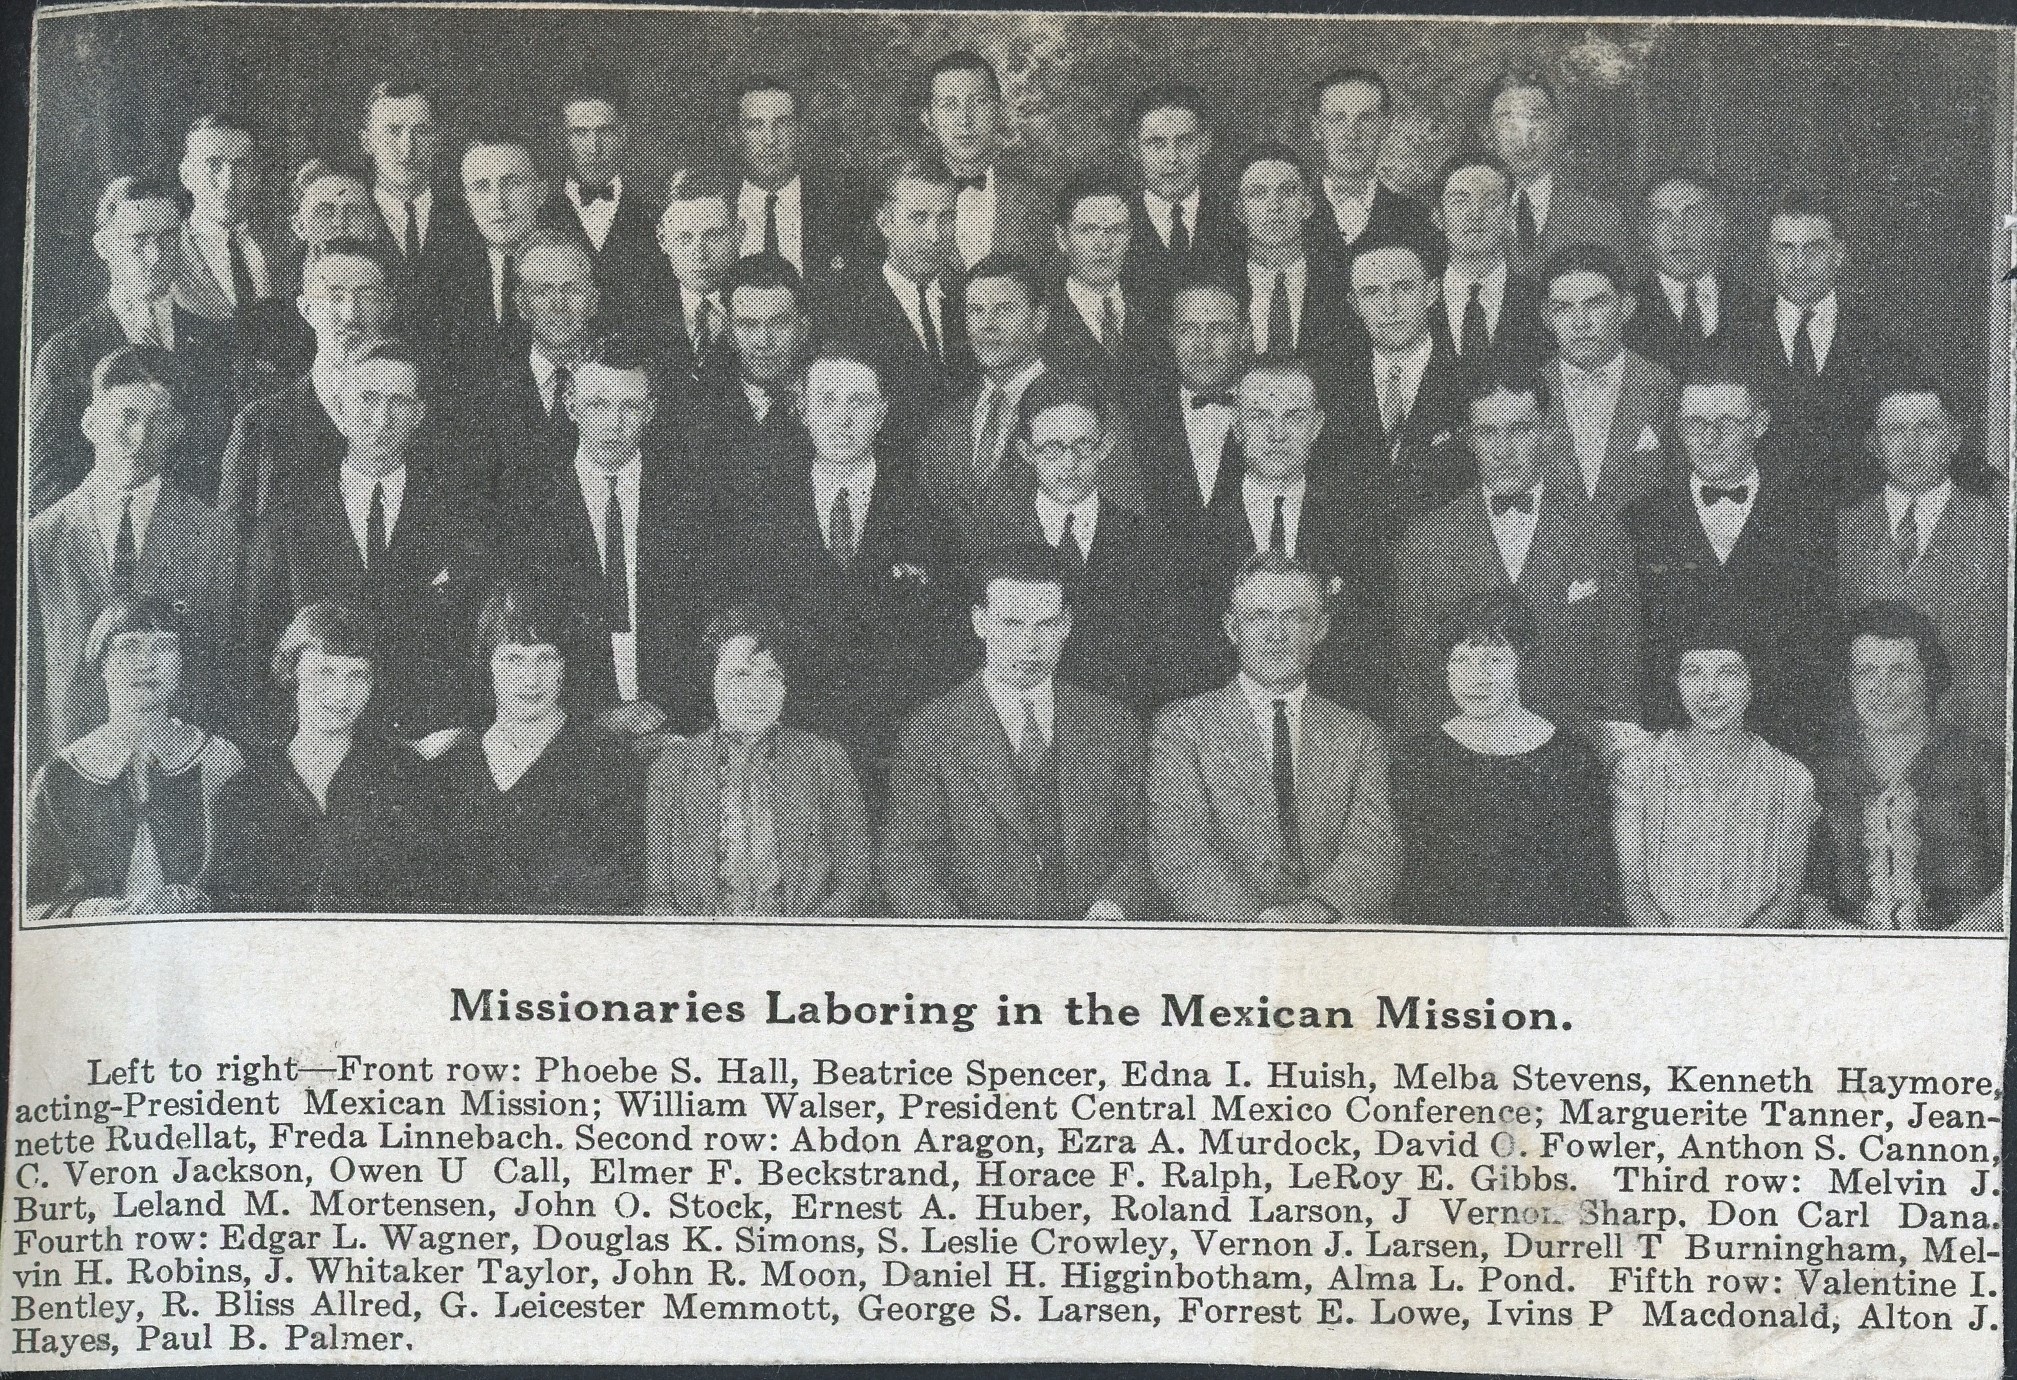 Mexican Mission - Mexico City conference - February 13, 1926